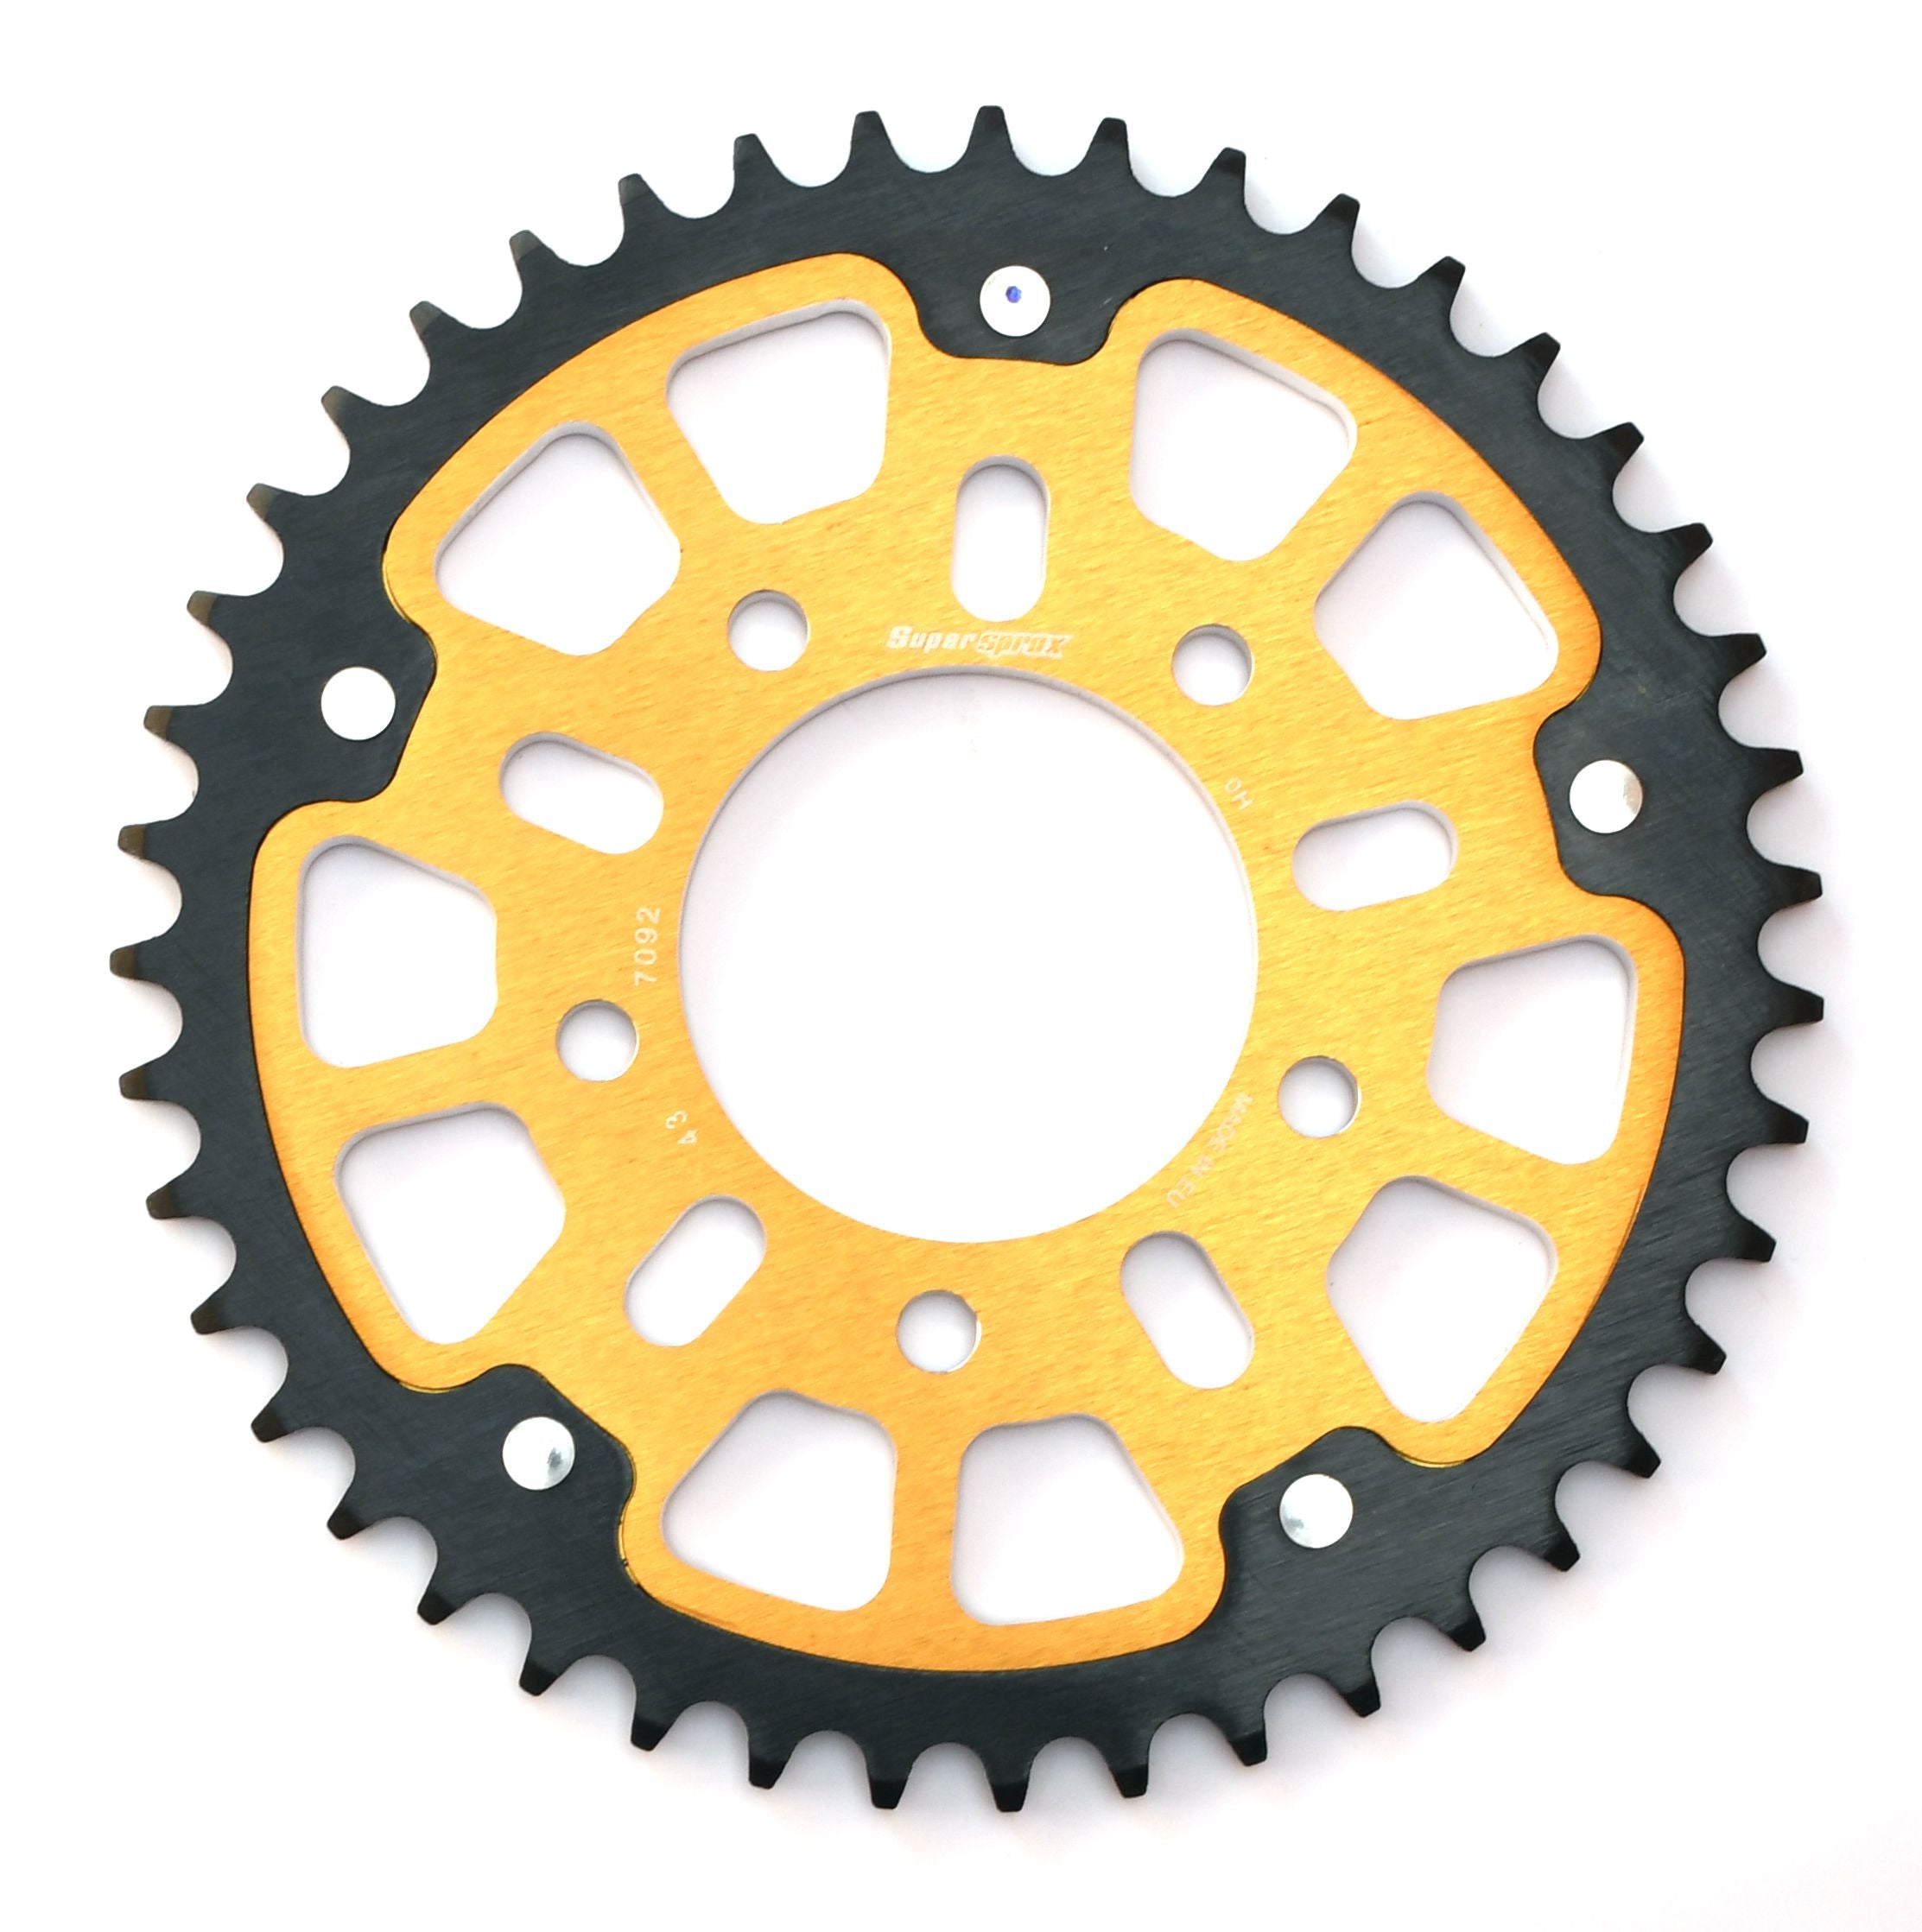 Supersprox Stealth 525 Pitch Rear Sprocket RST-7092:43 - (525, 76mm Centre, 100mm PCD)